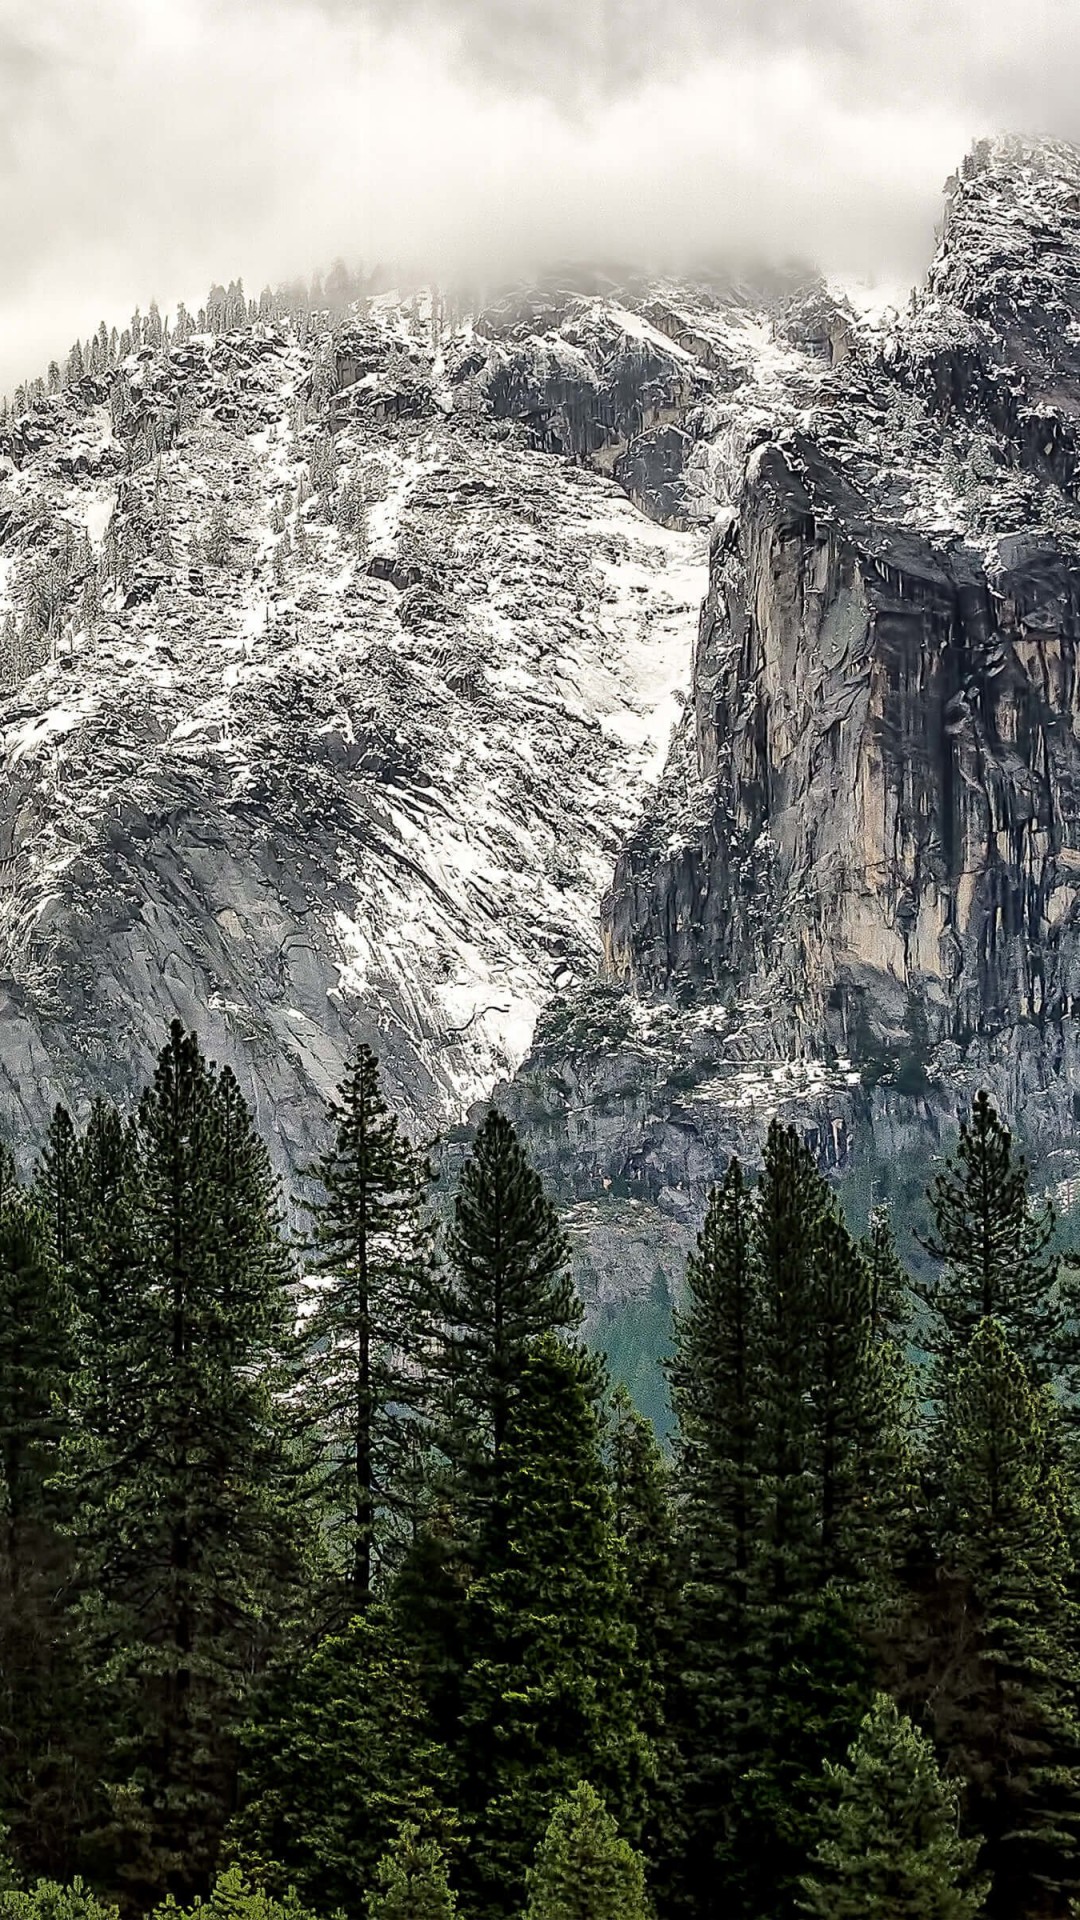 Winter Day at Yosemite National Park Wallpaper for SONY Xperia Z3